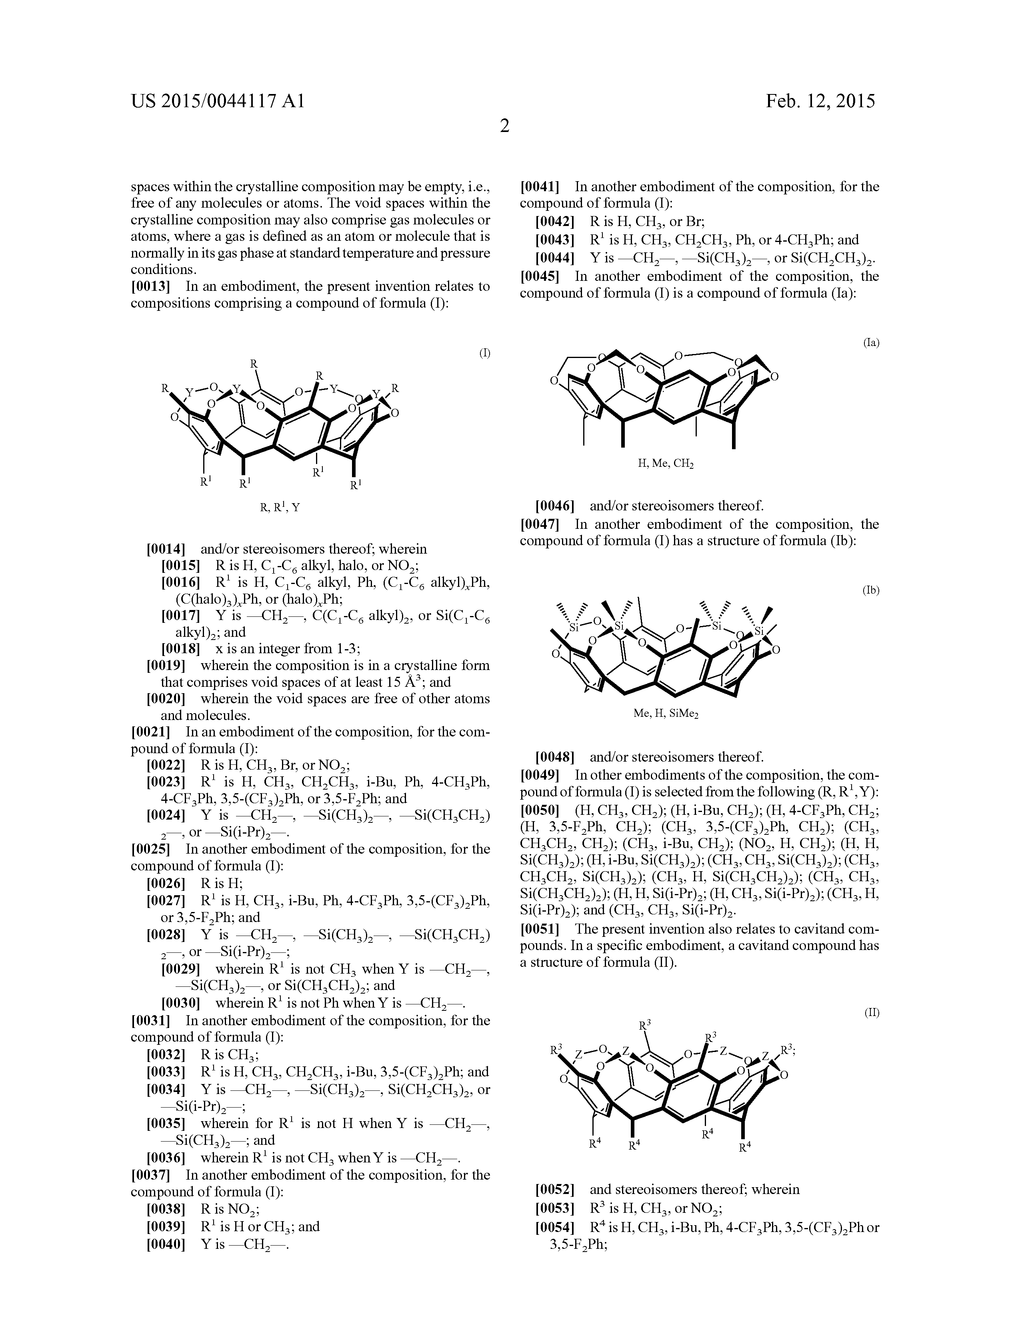 CAVITAND COMPOSITIONS AND METHODS OF USE THEREOF - diagram, schematic, and image 22